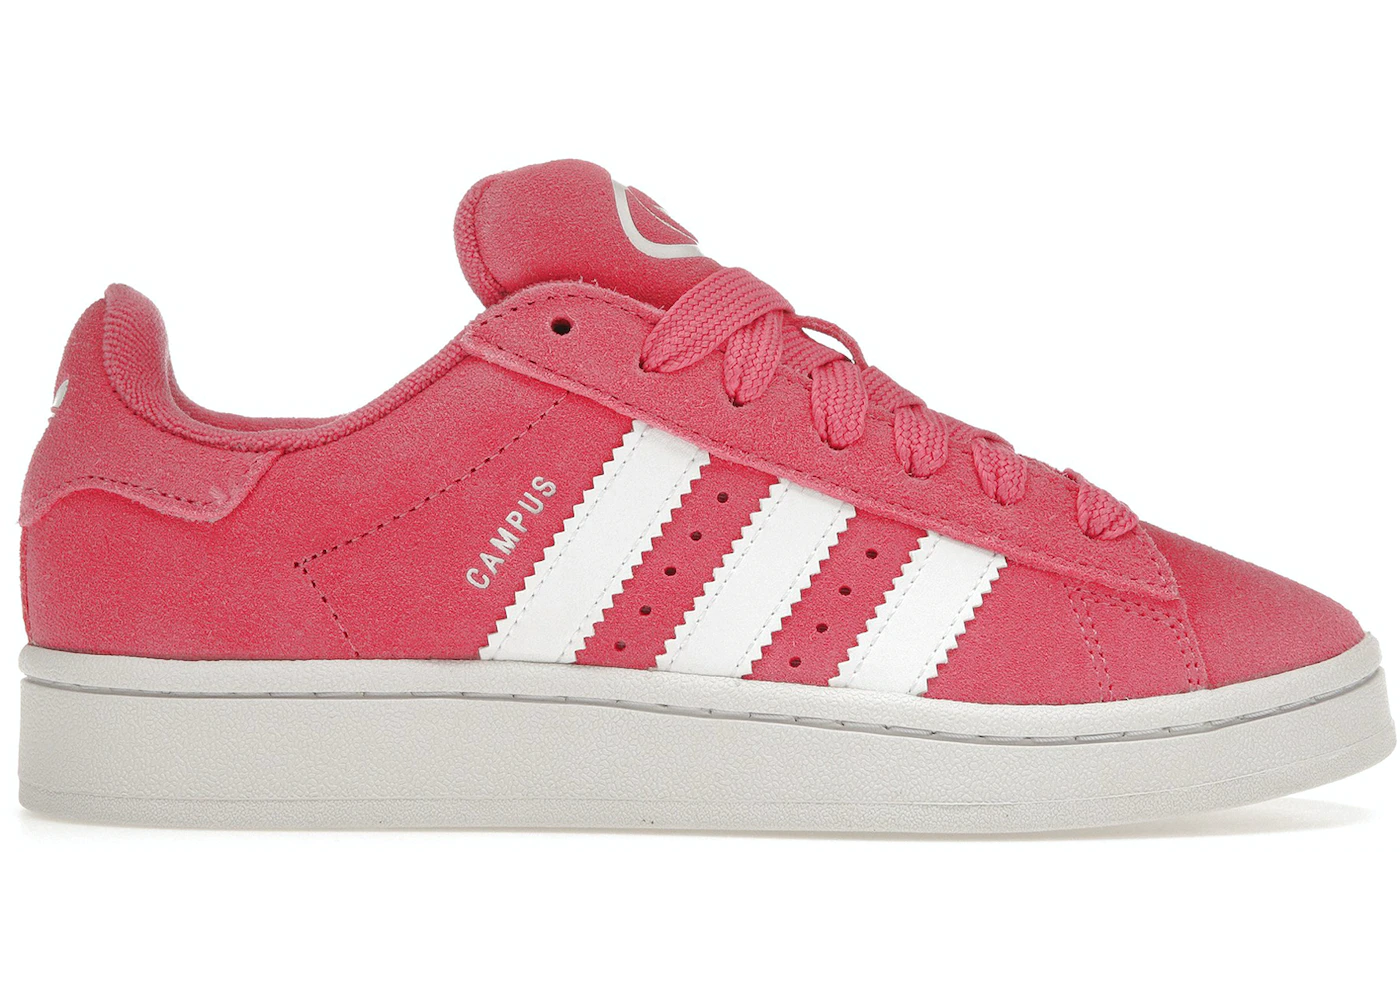 adidas Campus 00s Pink Fusion (Women's) - ID7028 - US